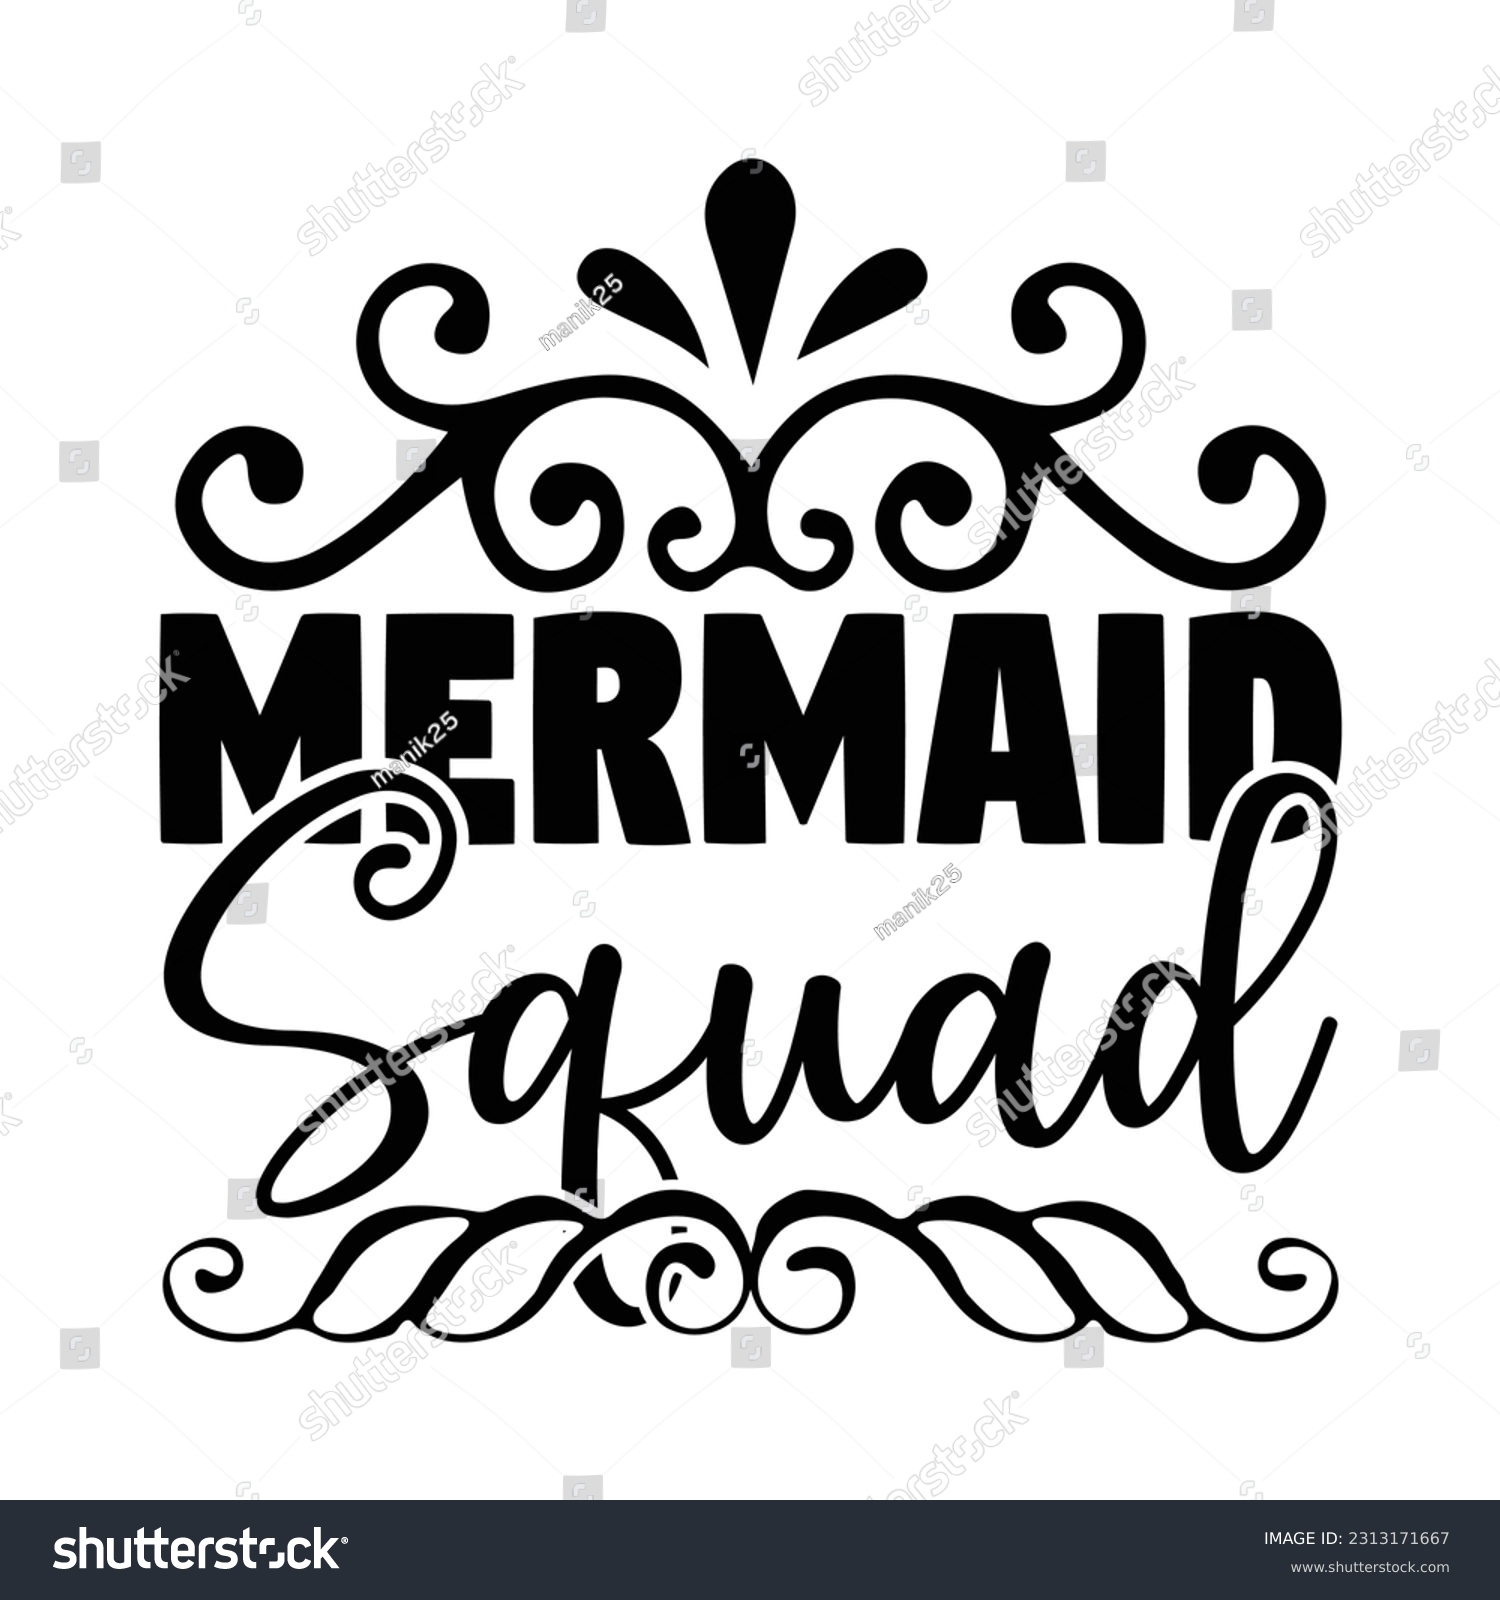 SVG of Mermaid Squad,  Fishing SVG Quotes Design Template svg